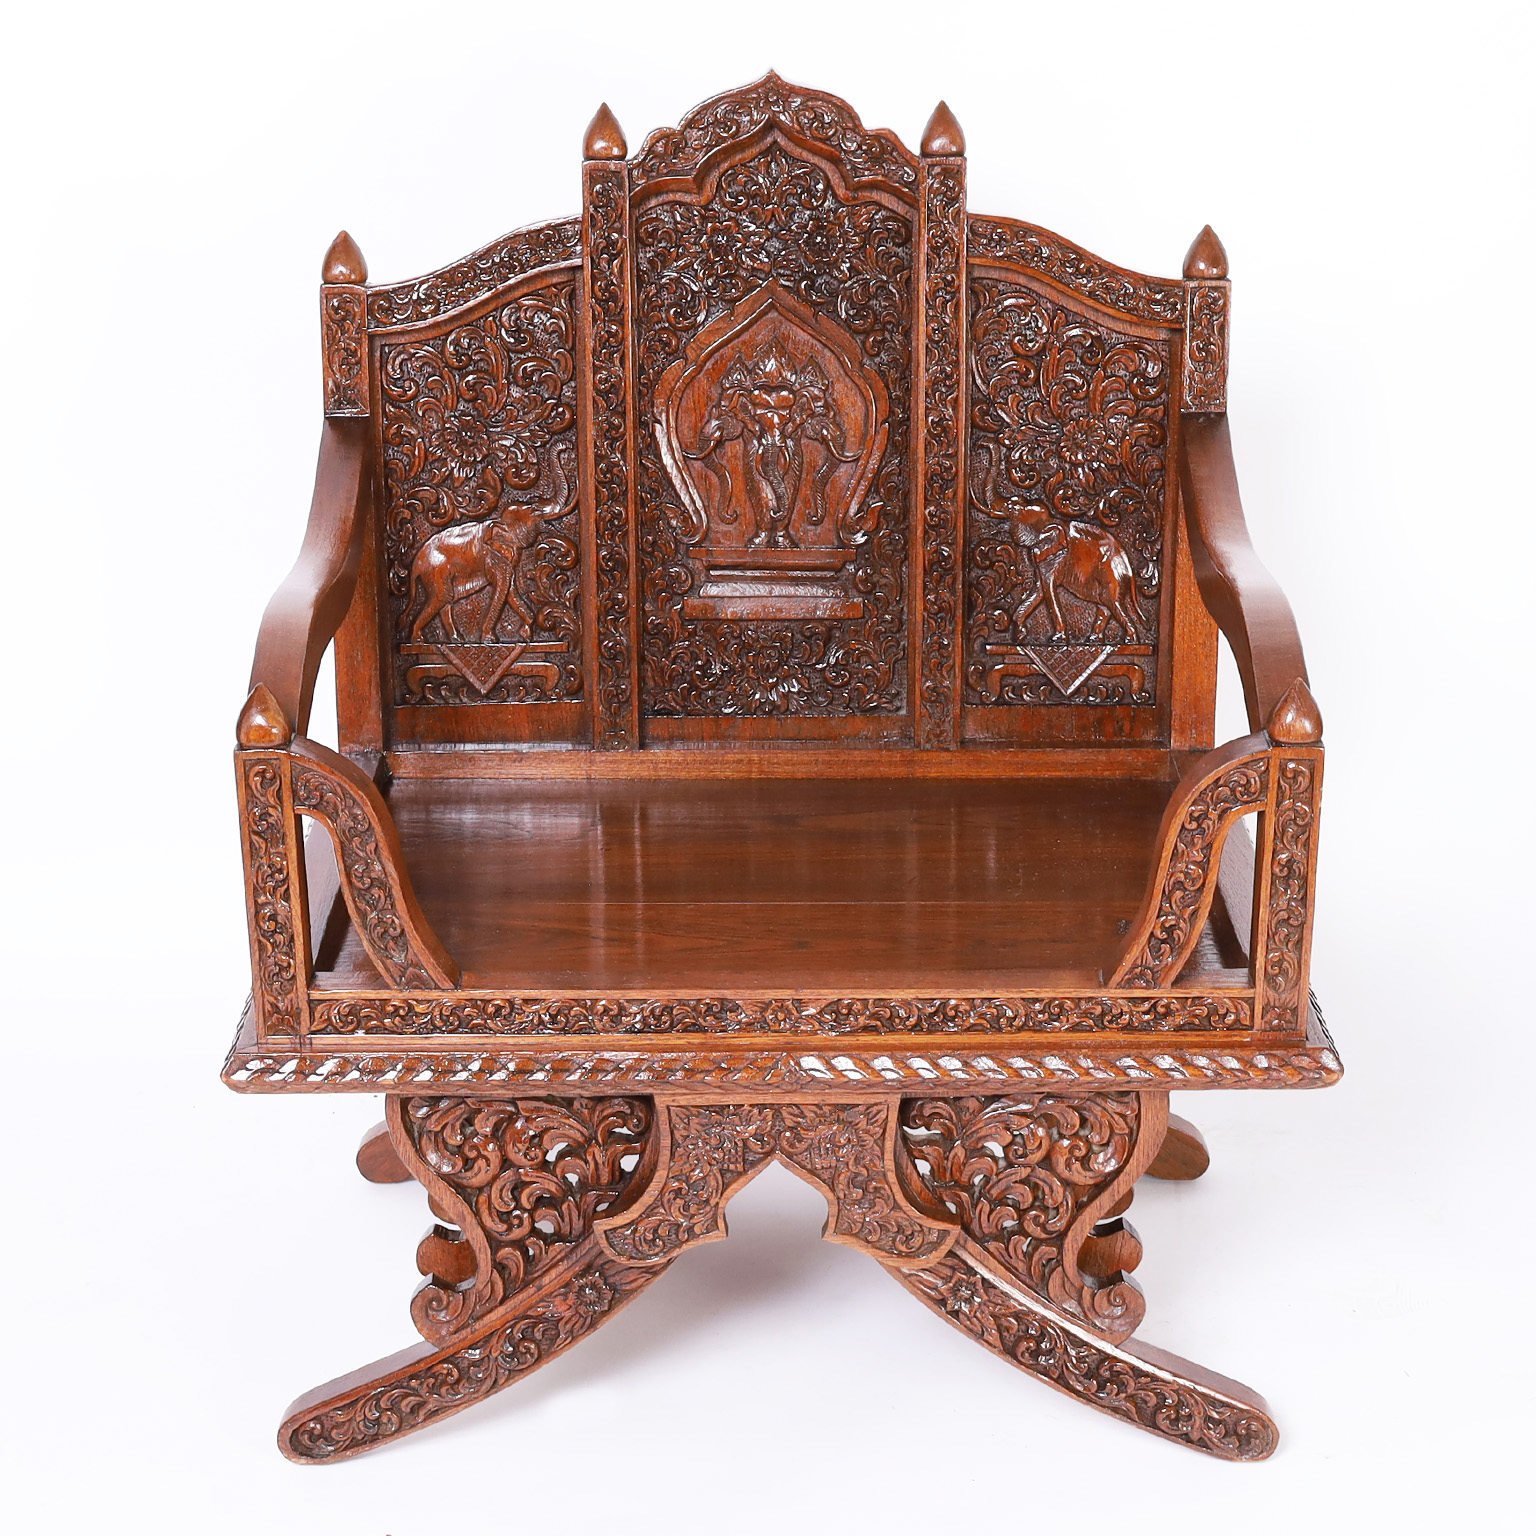 Pair of Antique Thai Rosewood Elephant Howdah Saddle Style Chairs